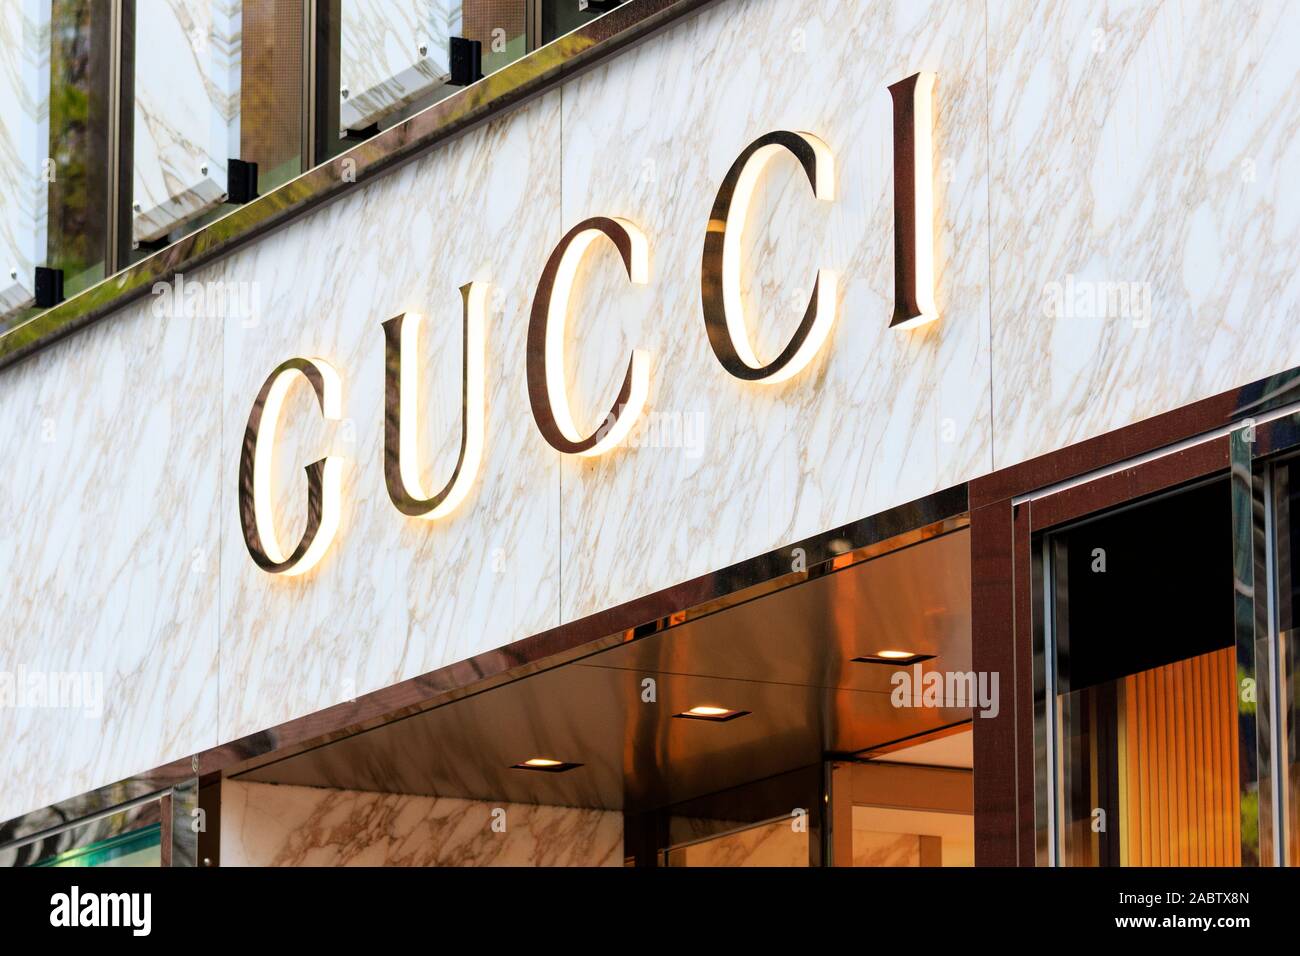 Close up of the Gucci logo over entrance of Gucci flagship store on the  Tokyo Ginza fashionable shopping street Stock Photo - Alamy